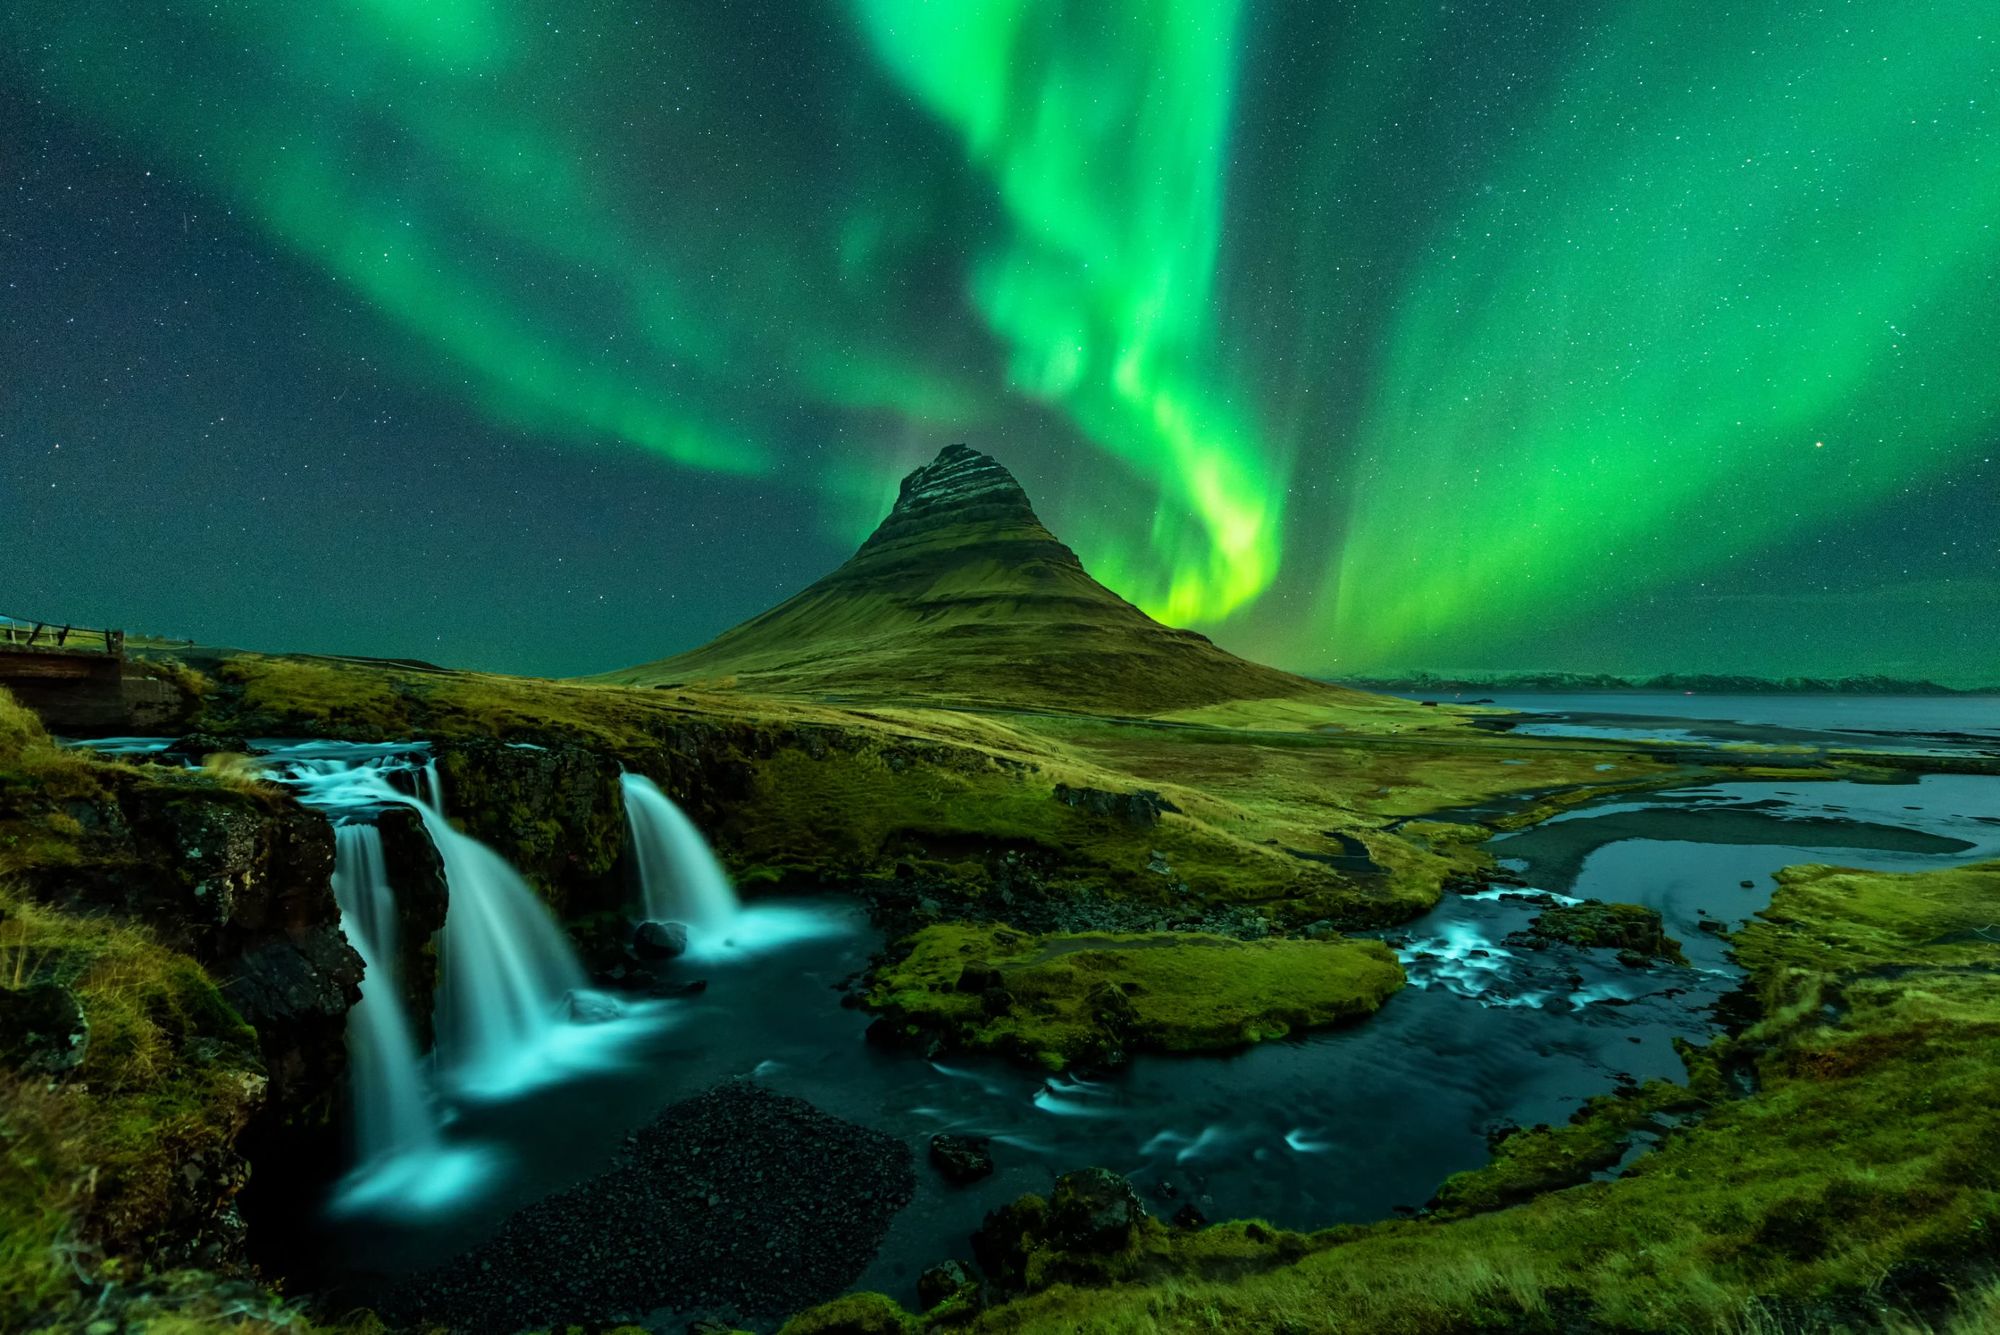 The northern lights shine over Mount Kirkjufell and the famous kirkjufellfoss waterfall in Iceland. Photo: Getty